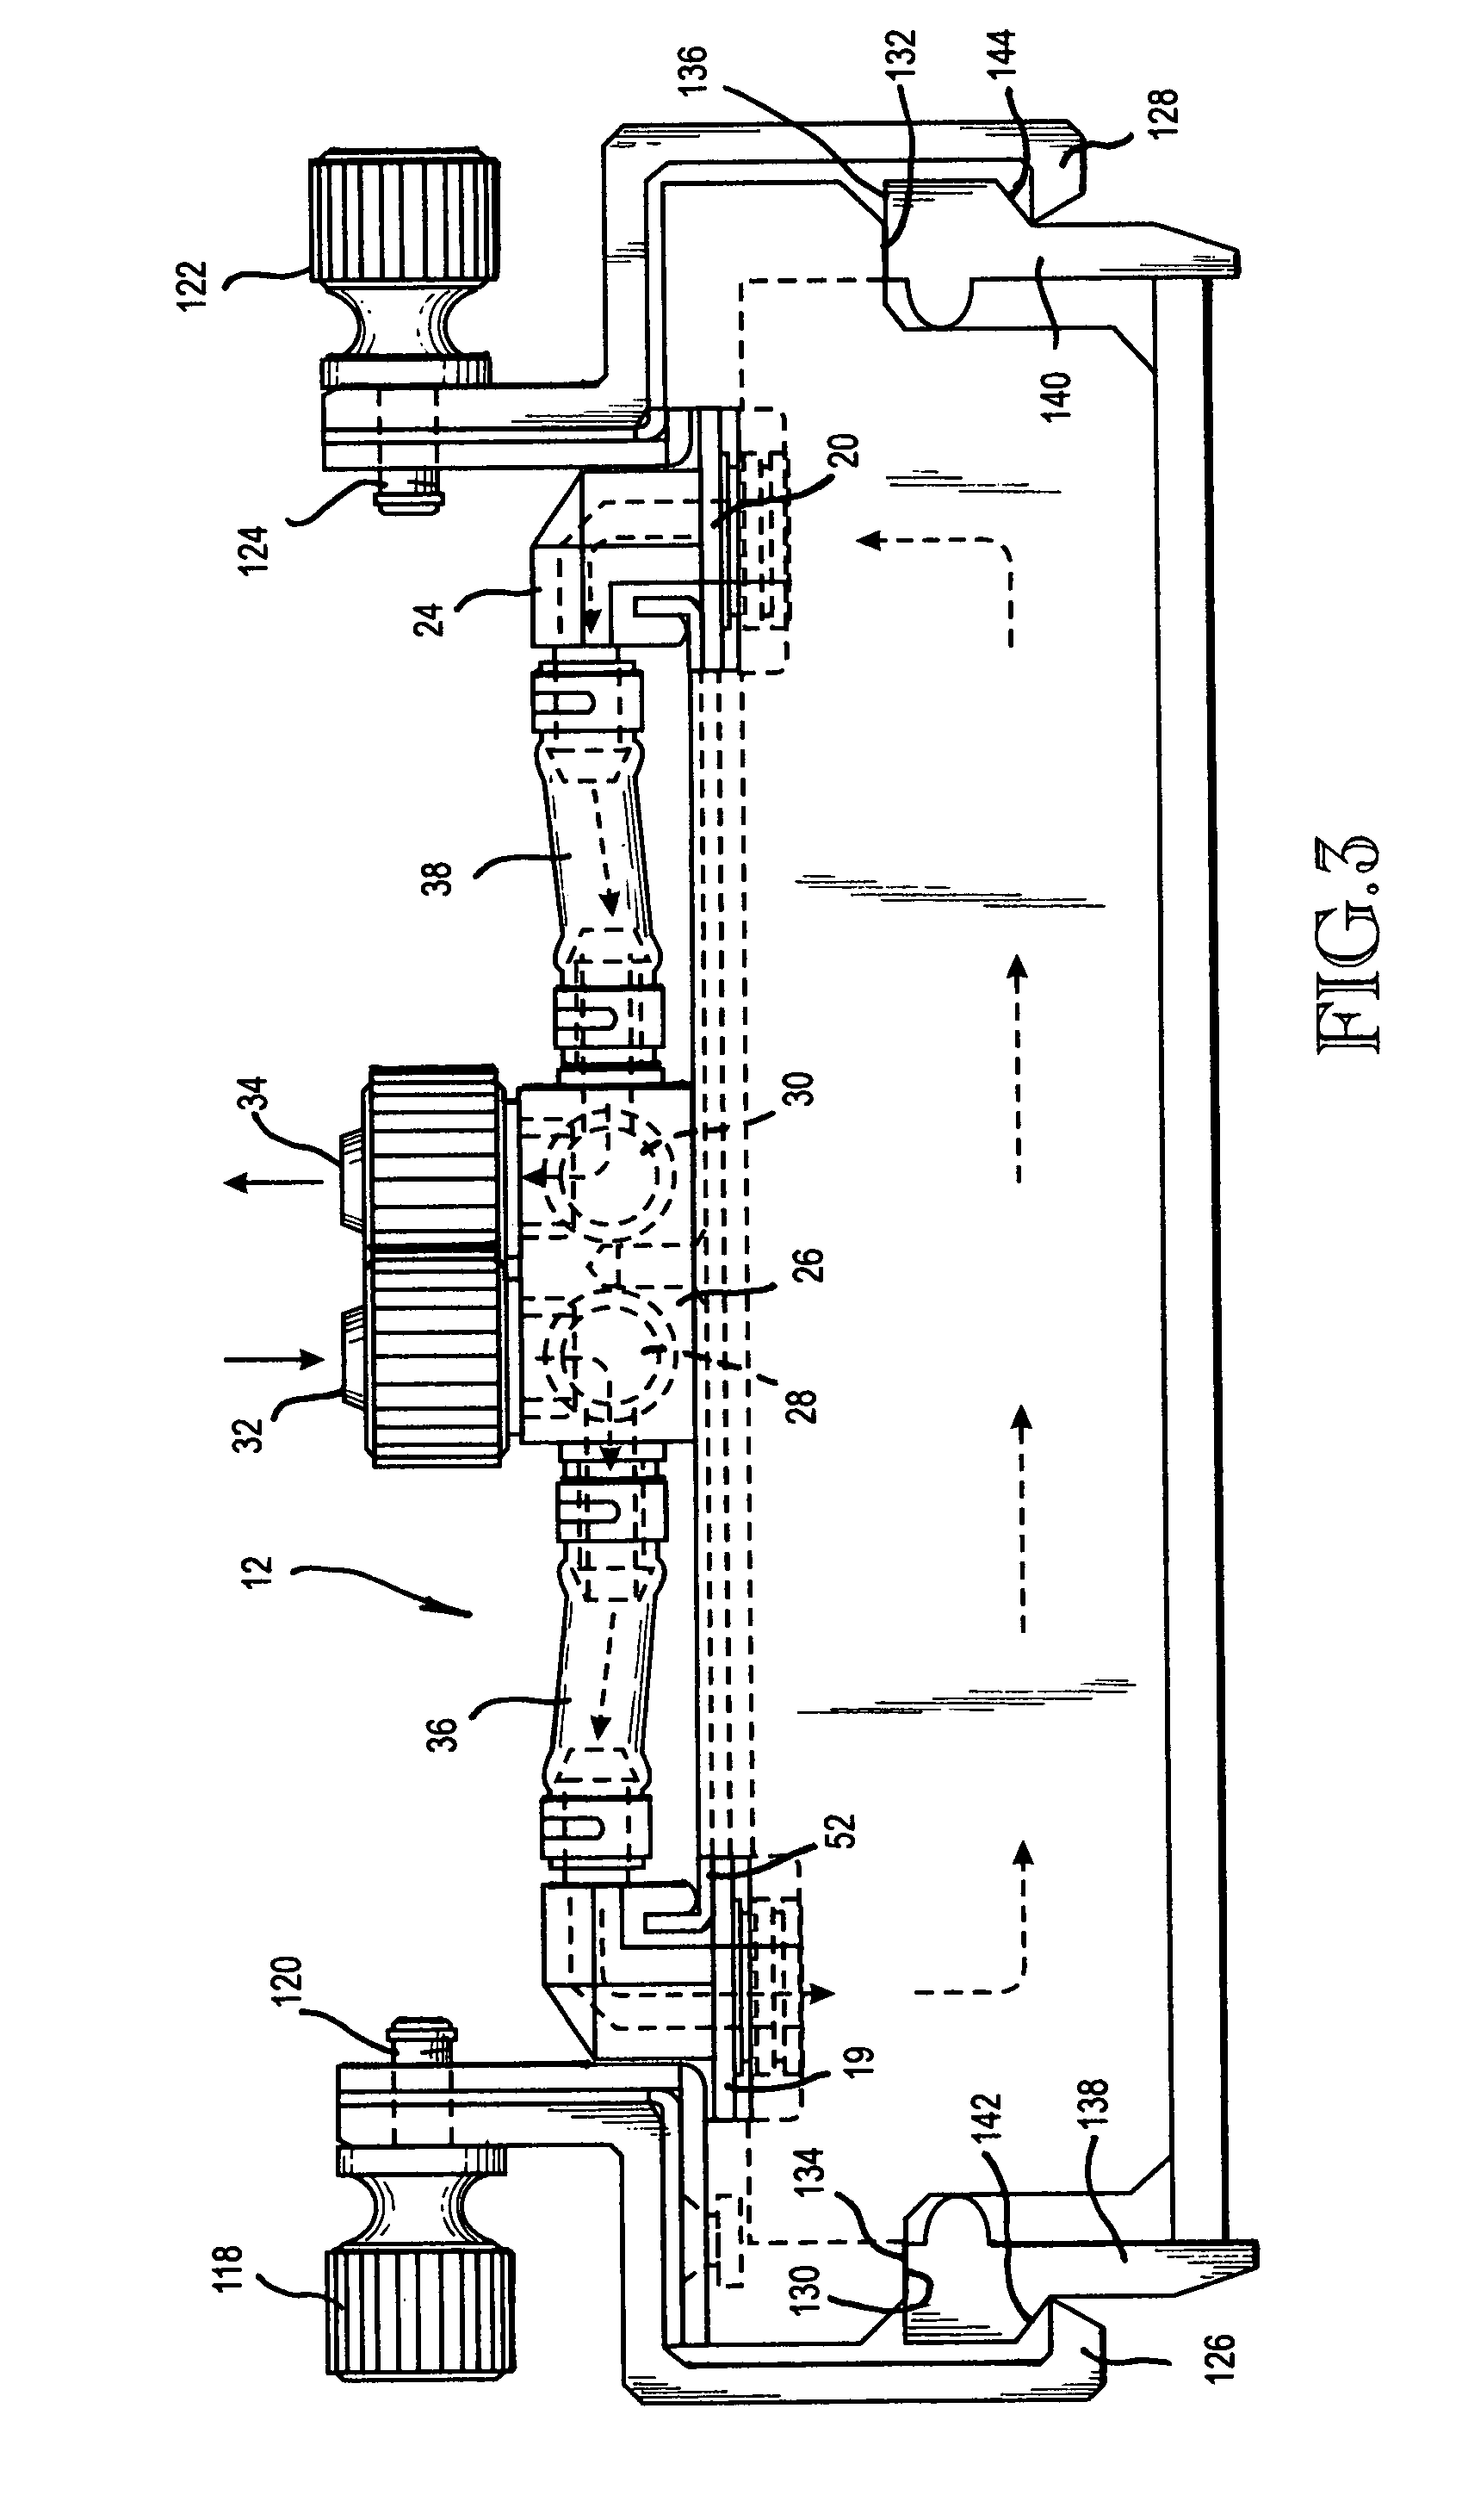 Cooling system for electronic devices